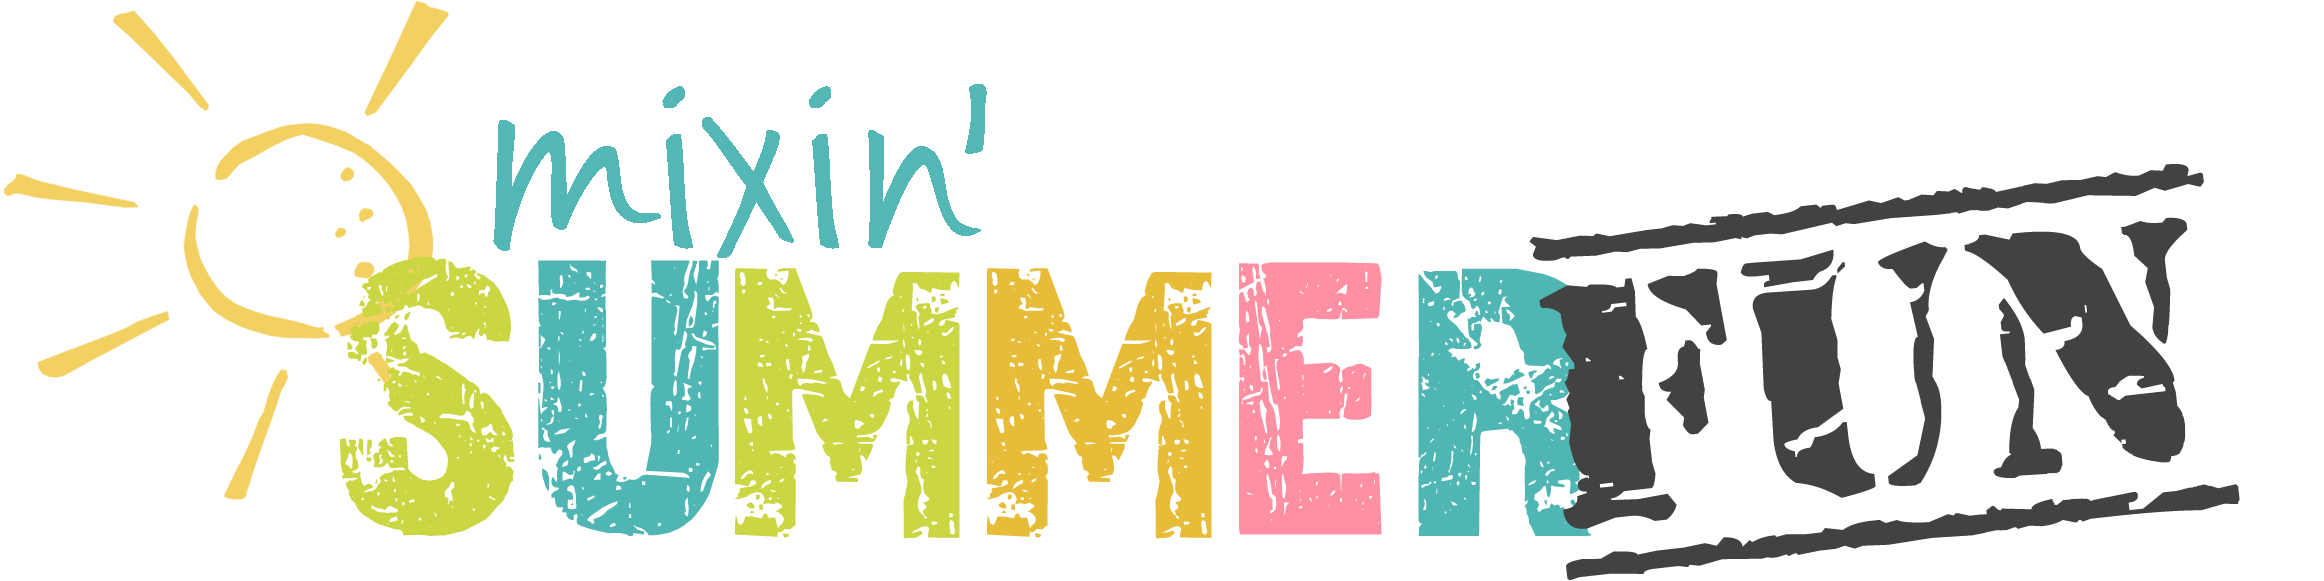 In the mix project. Pennant clipart summer